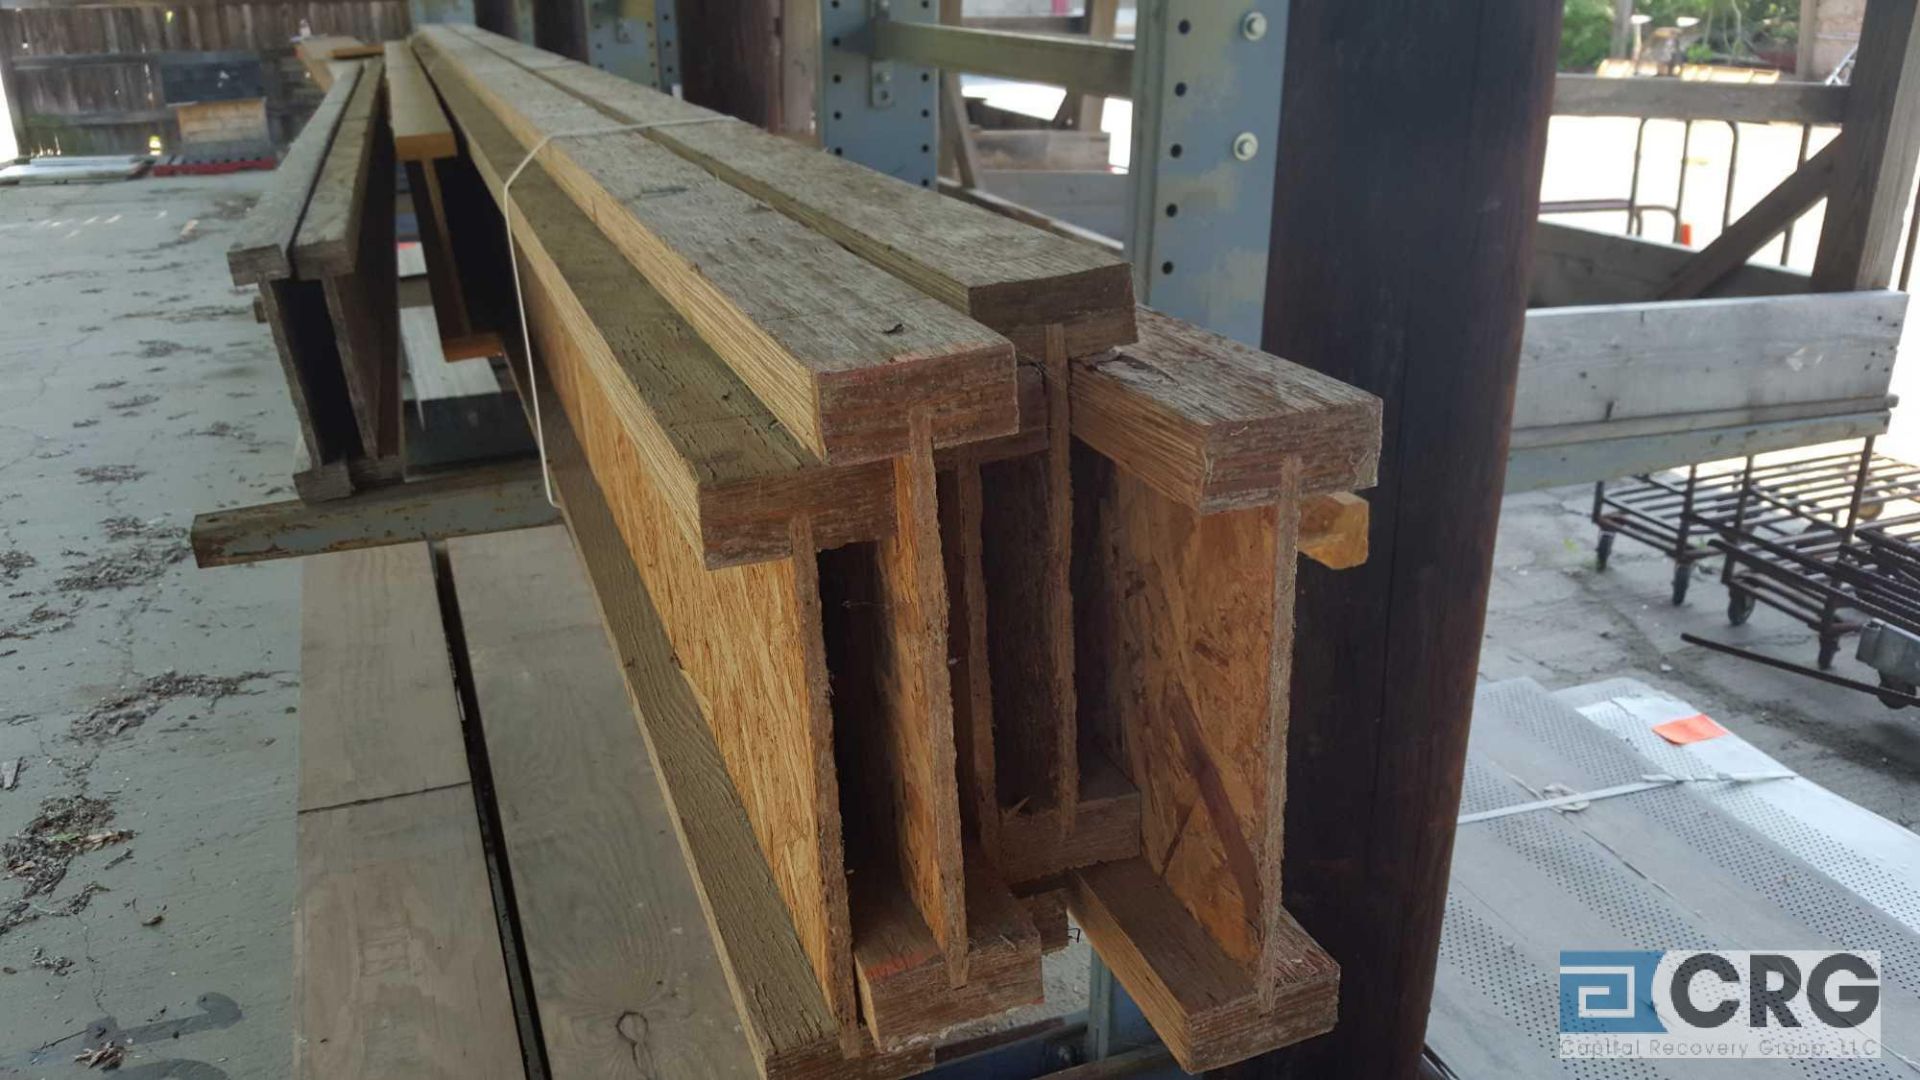 Lot of (5) assorted wood I beams, (1) 3 1/2 in. x 14 in. x 14 ft., (4) 3 1/2 in. x 14 in. x 22 ft. - Image 2 of 3